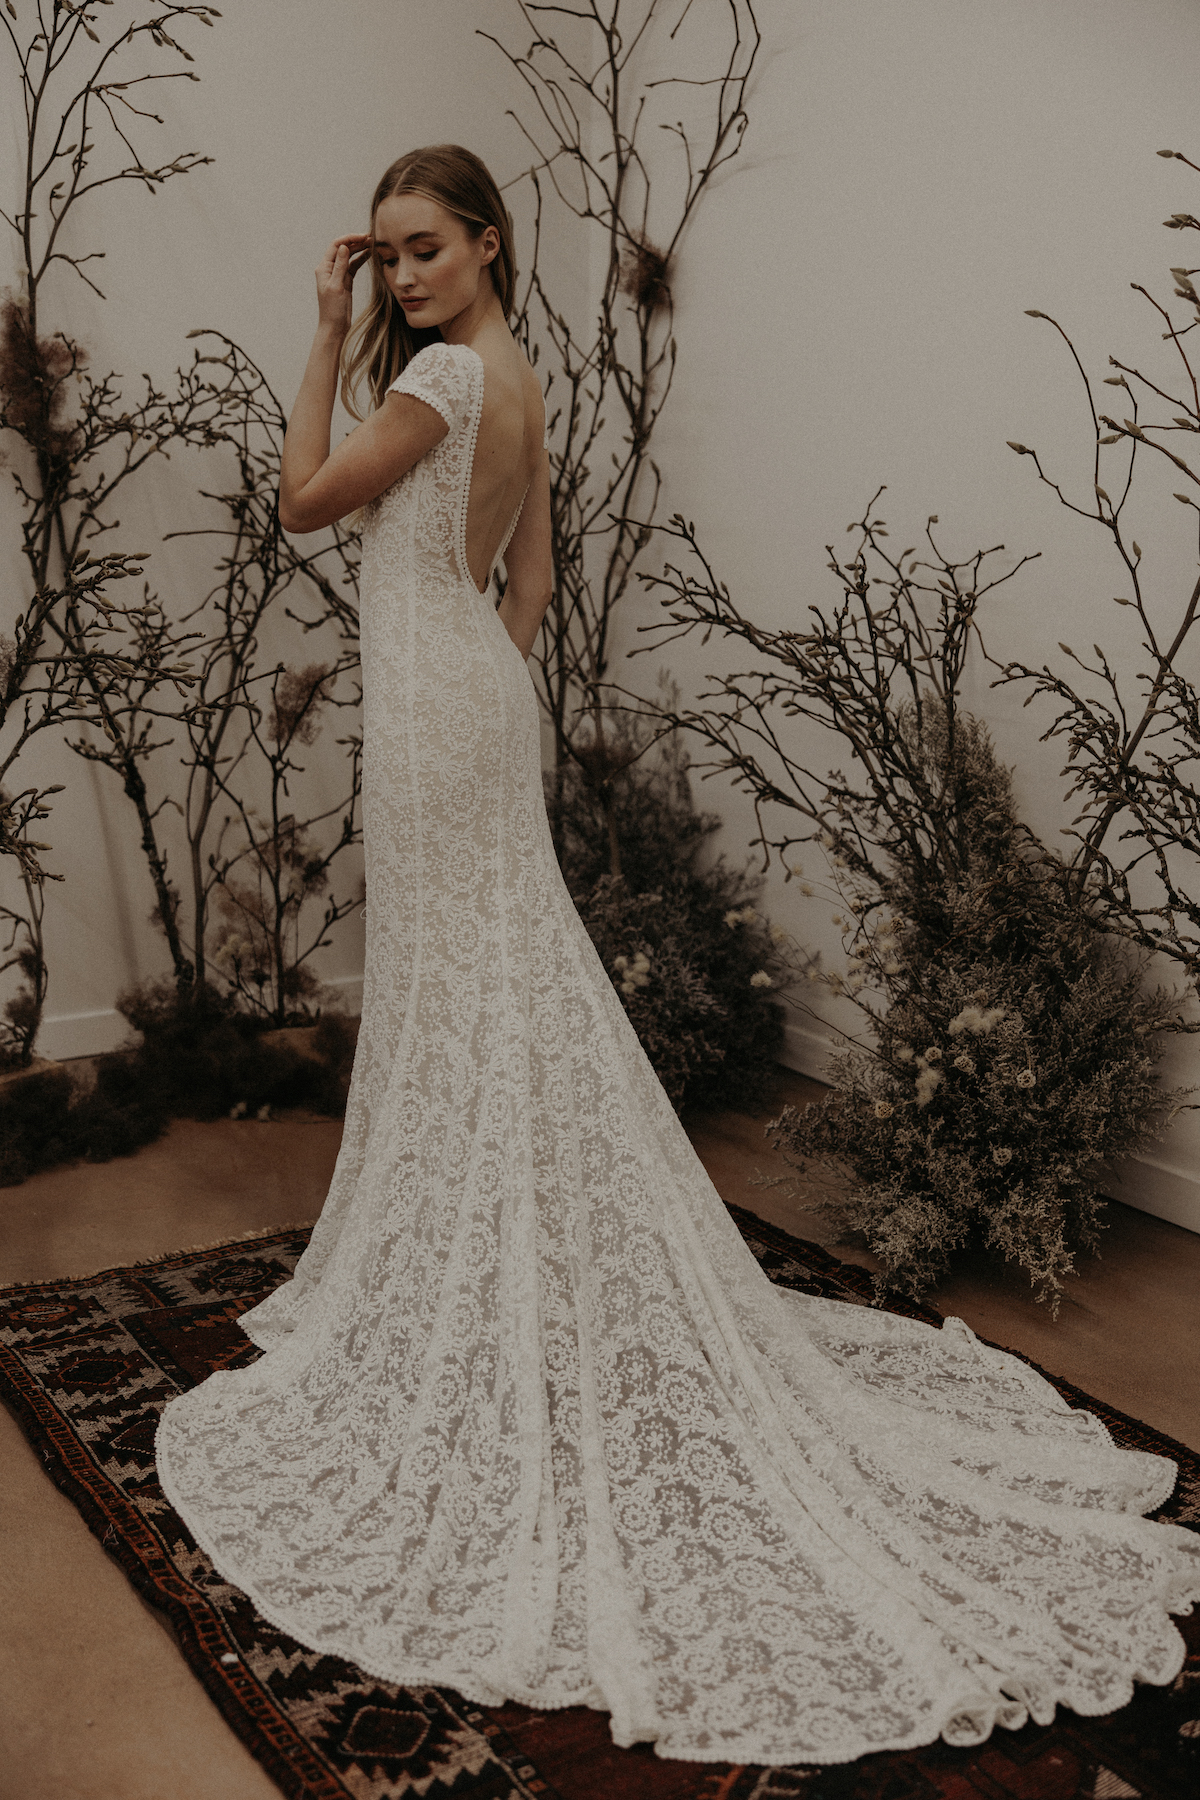 Simple Elegant Wedding Dresses That Make You Look Pretty on Your Wedding Day